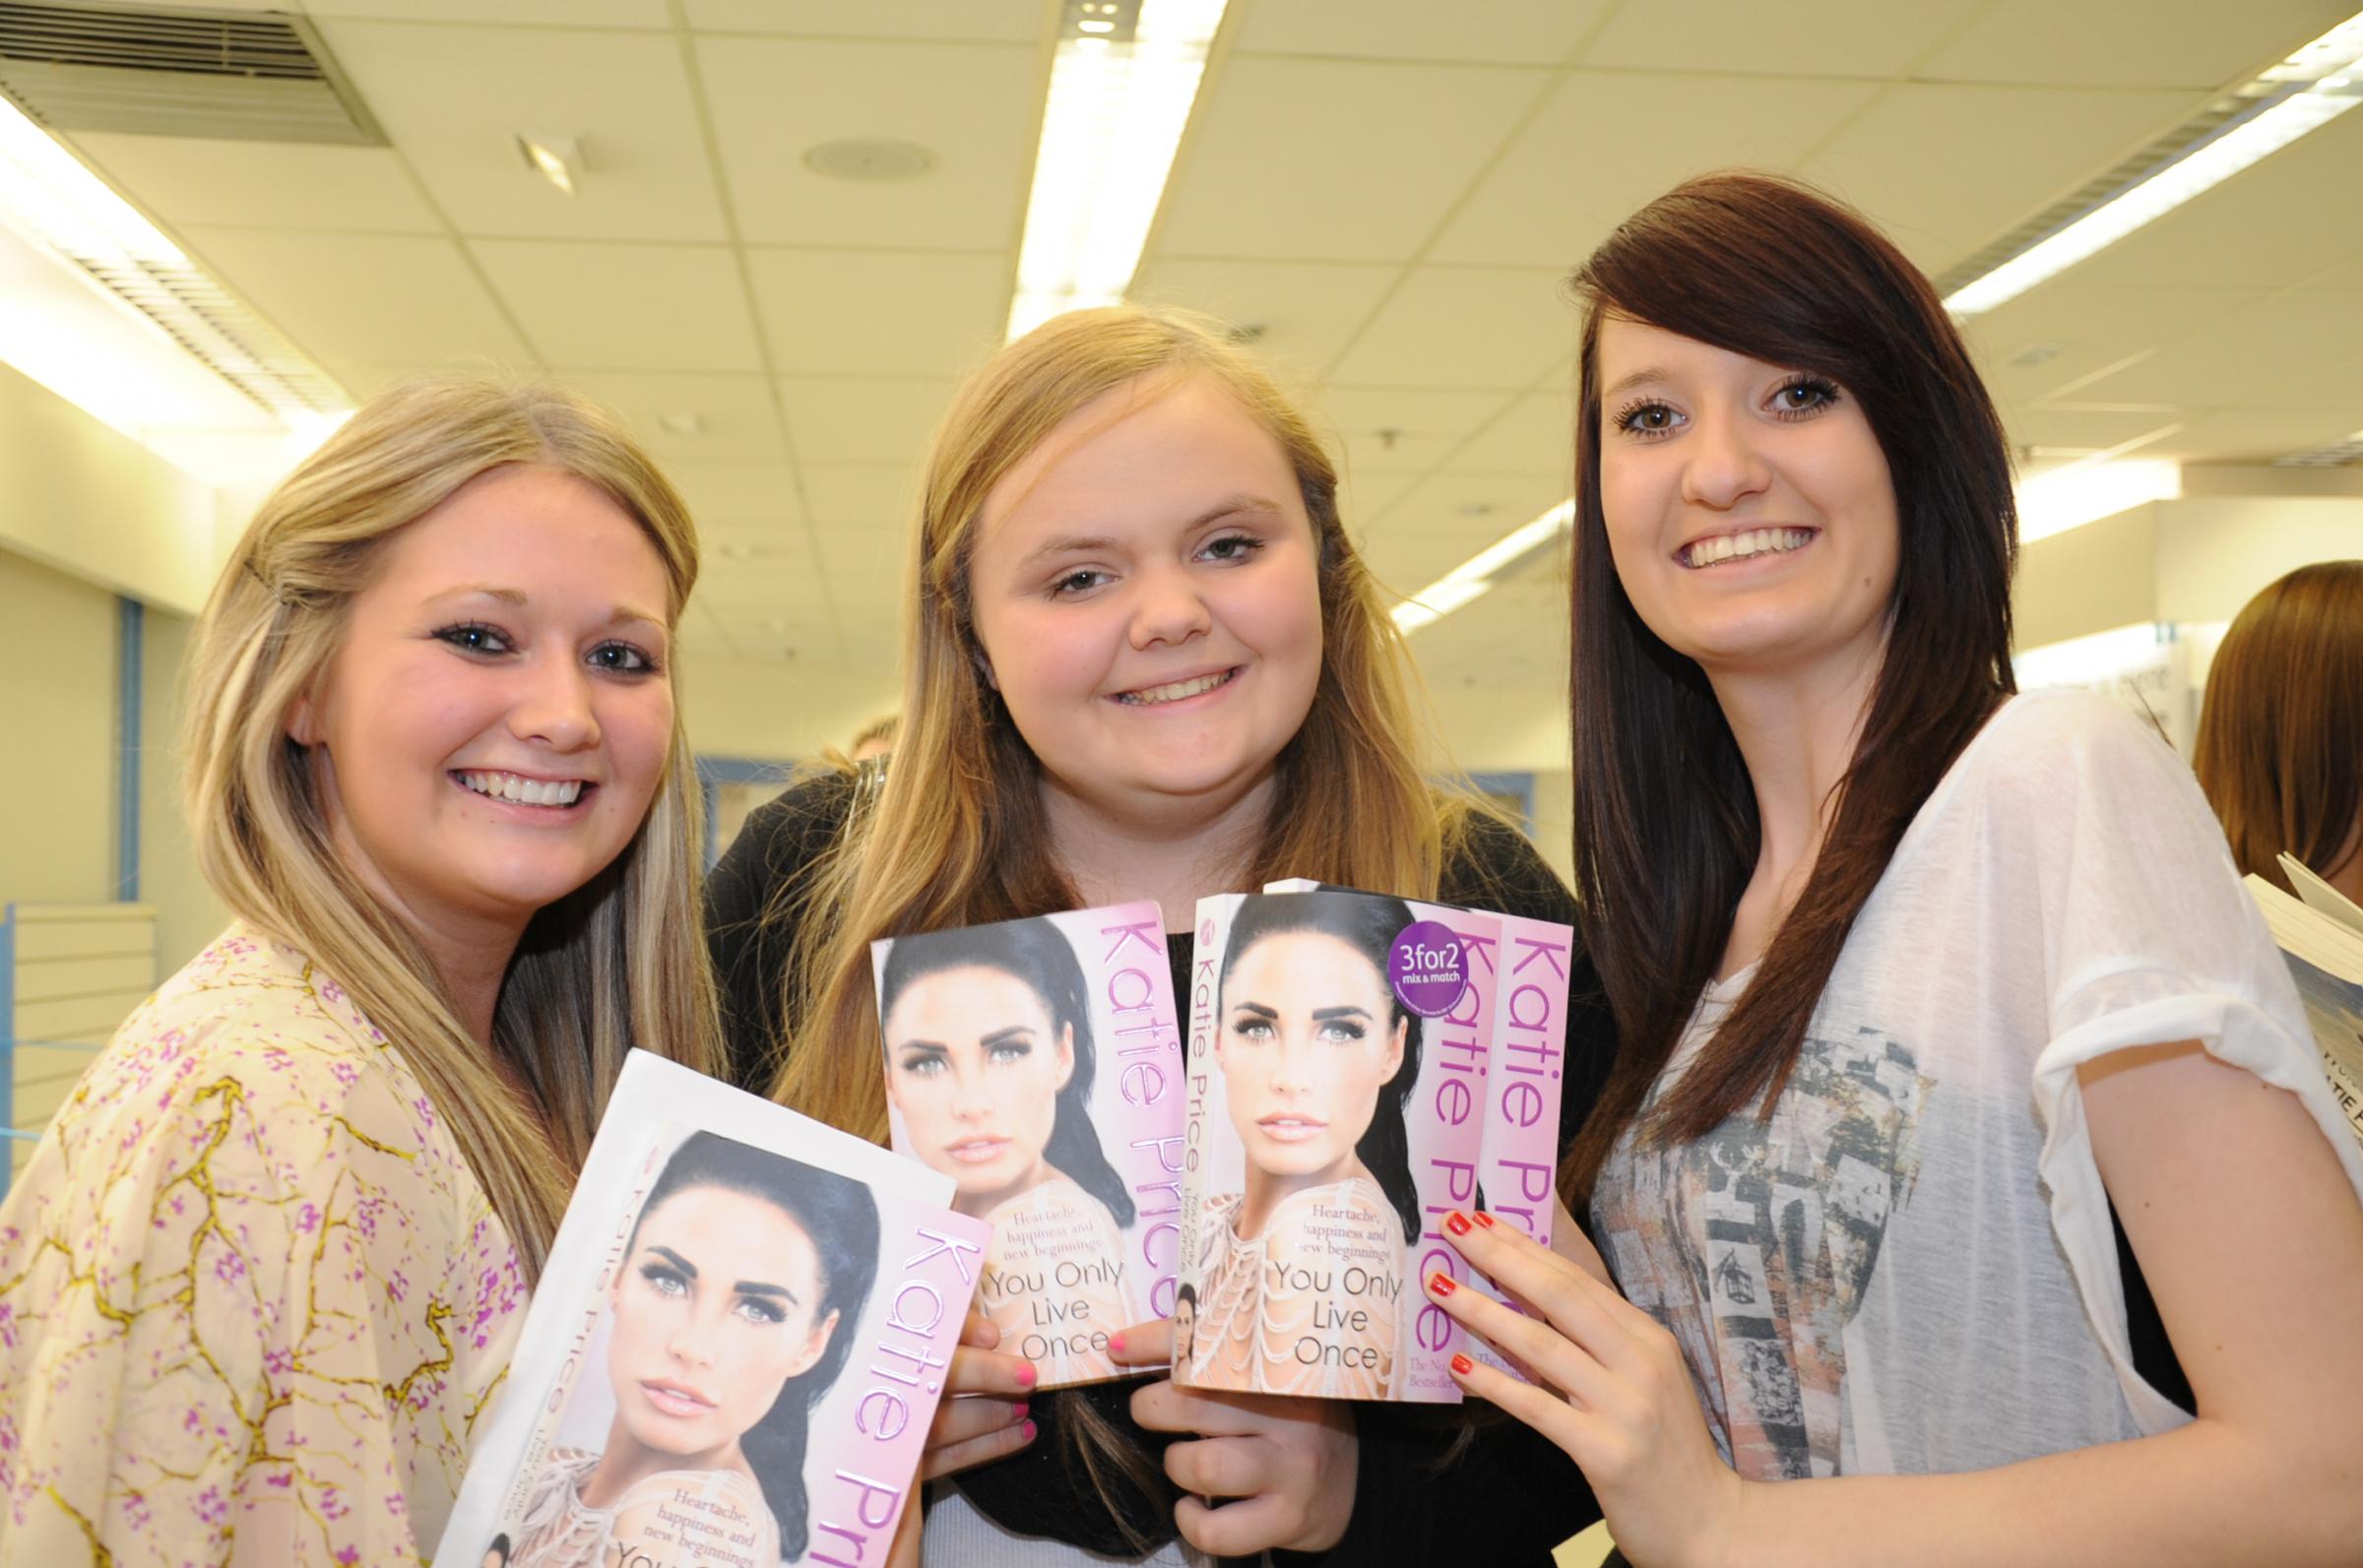 Avid fans - Nicole Carter, Paige Nesbit and Chloe Gallacher were first in line and waited six-and-a-half hours to meet Katie Price at the Eastgate Shopping Centre in April 2011